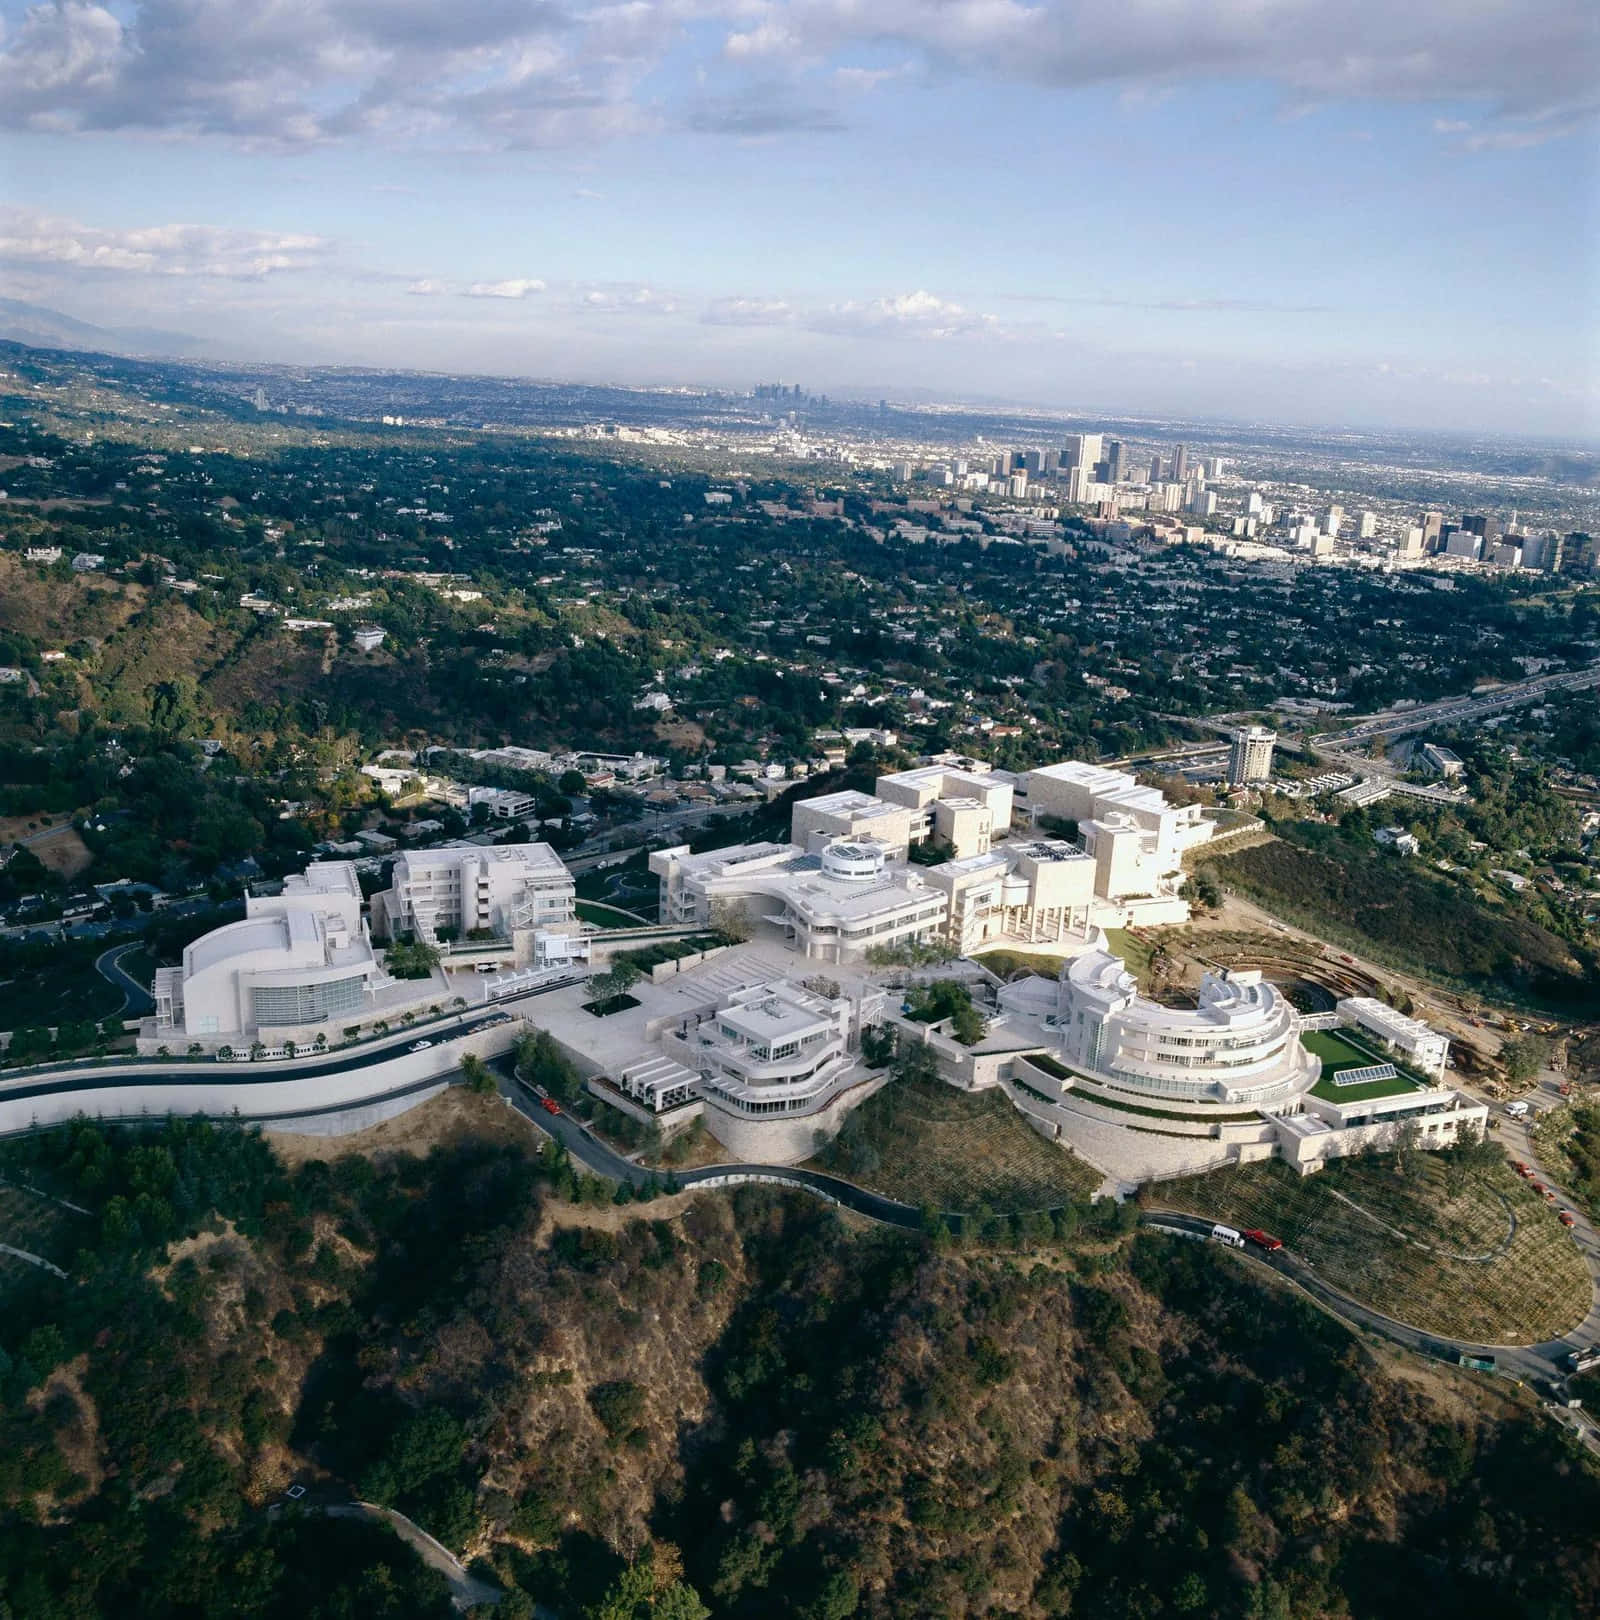 Getty Center Aerial View Wallpaper